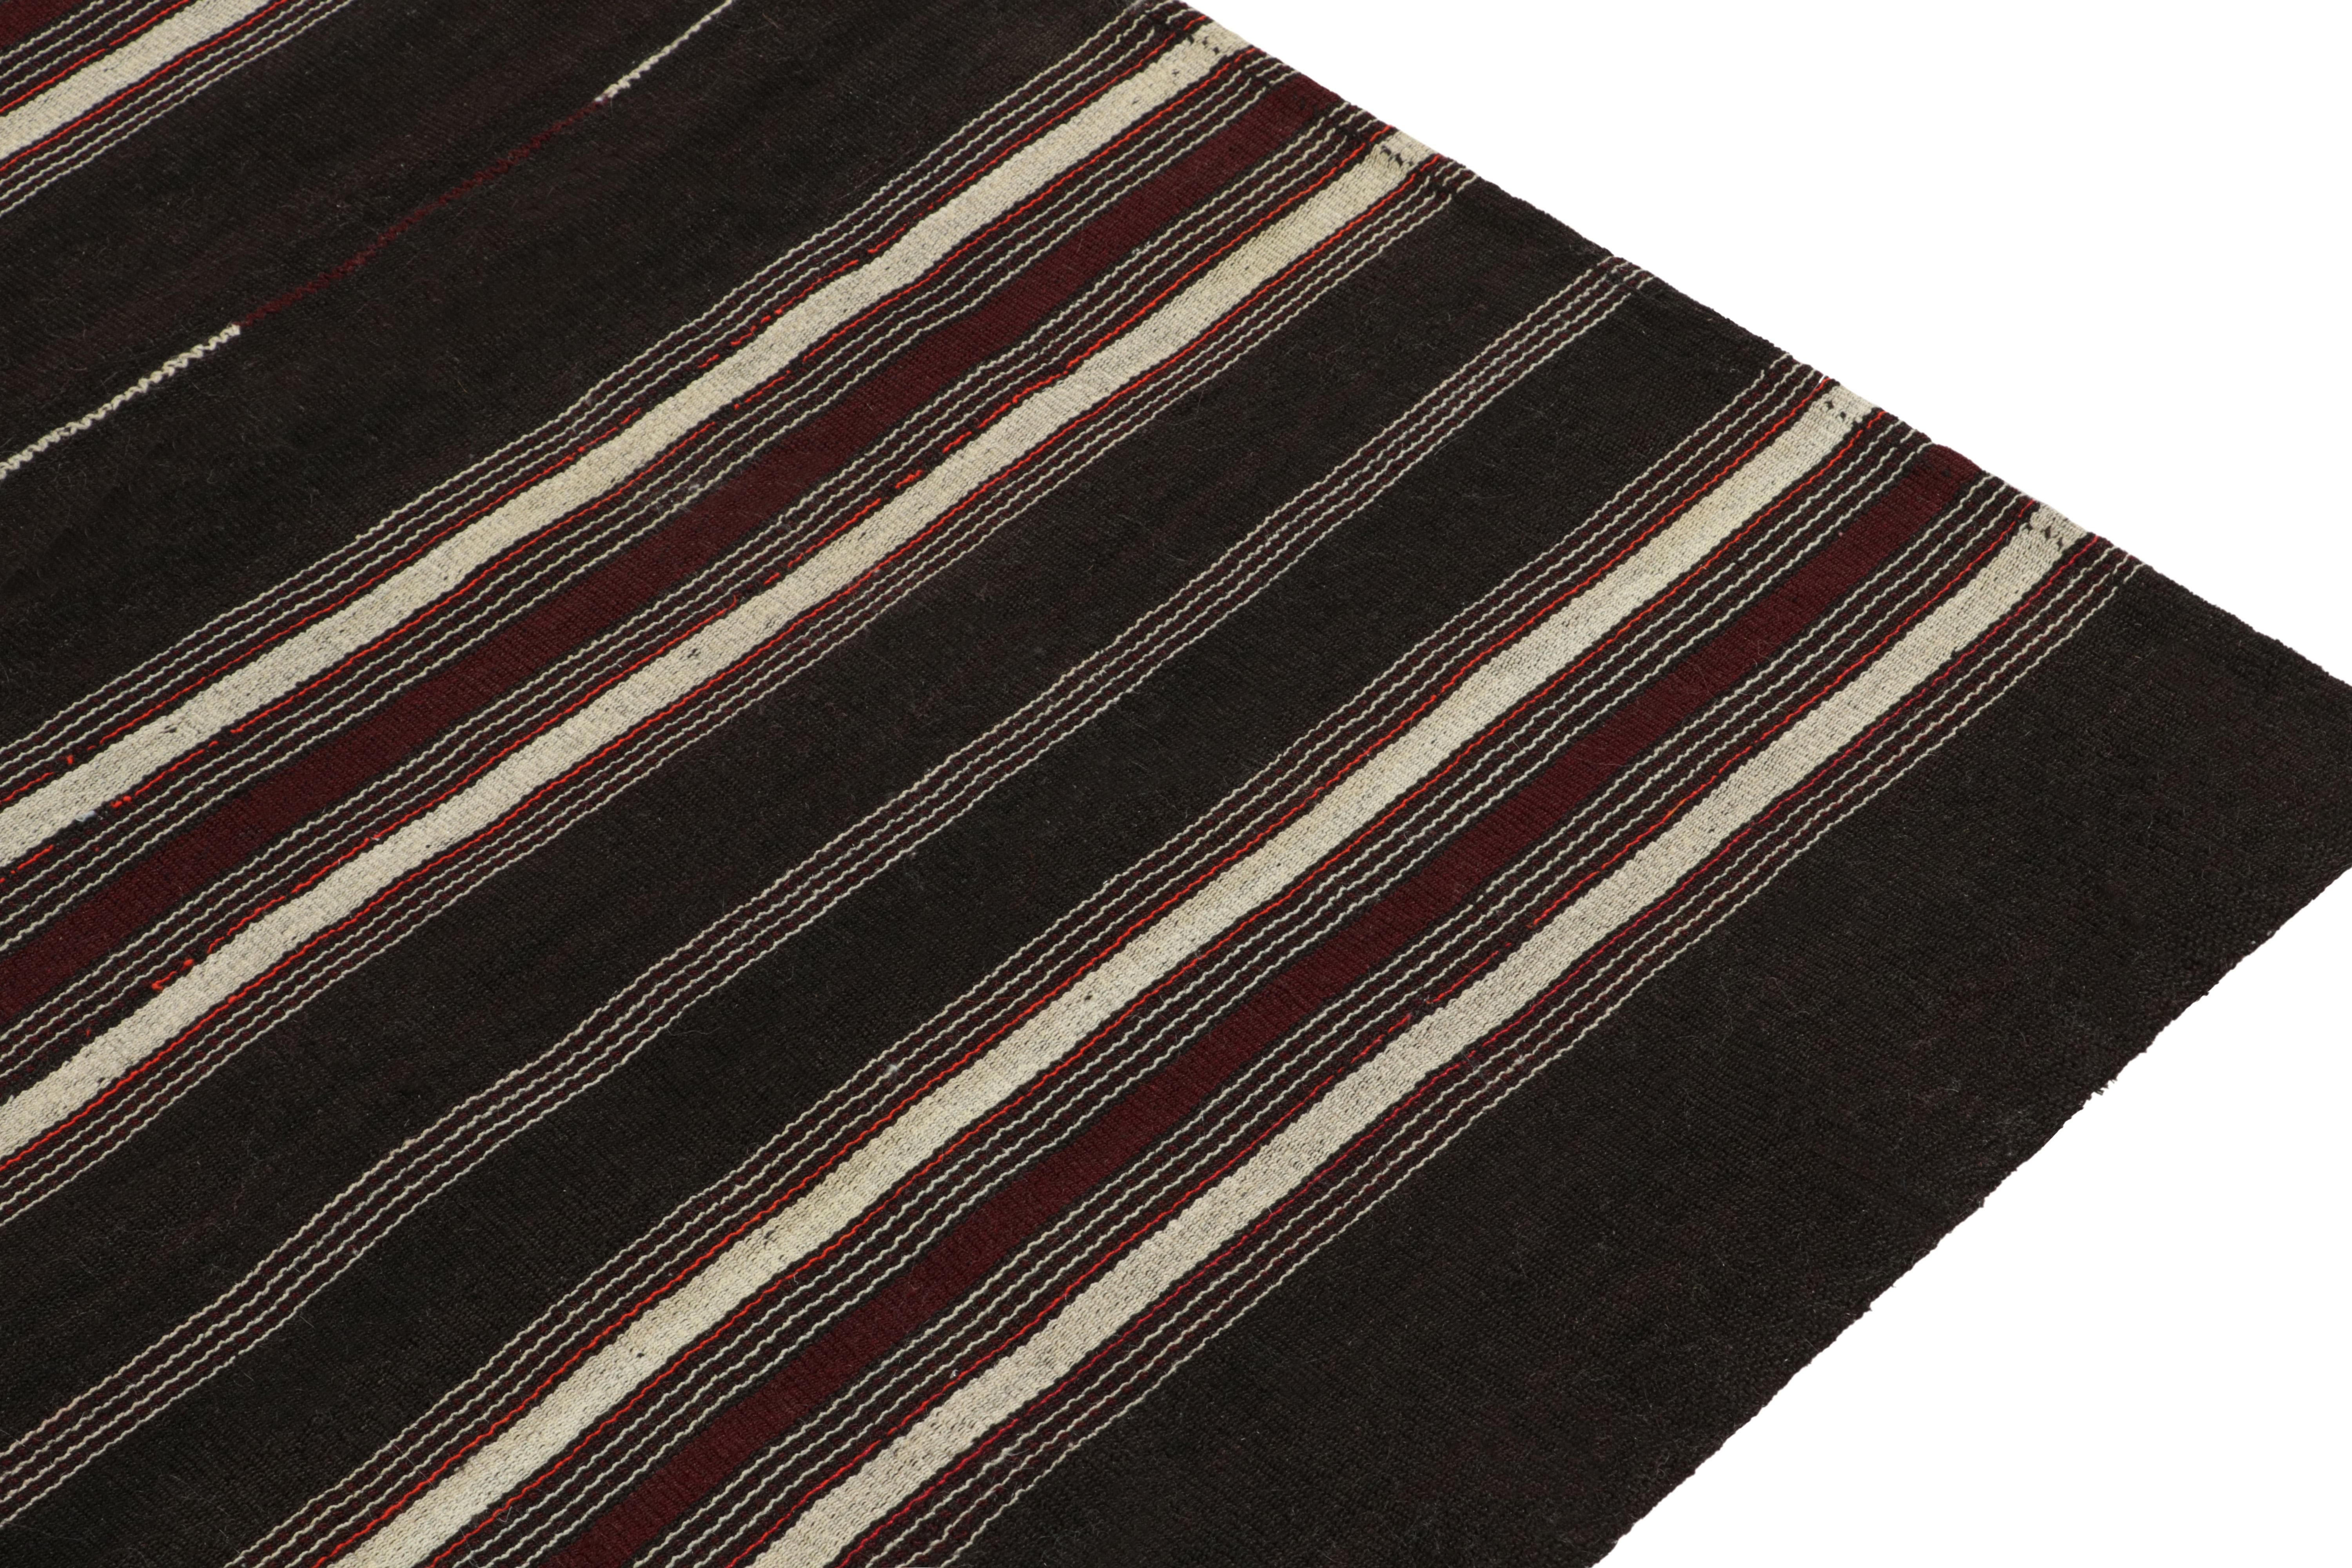 Vintage Kilim Rug in Deep Brown with Red & White Stripe Pattern by Rug & Kilim In Good Condition For Sale In Long Island City, NY